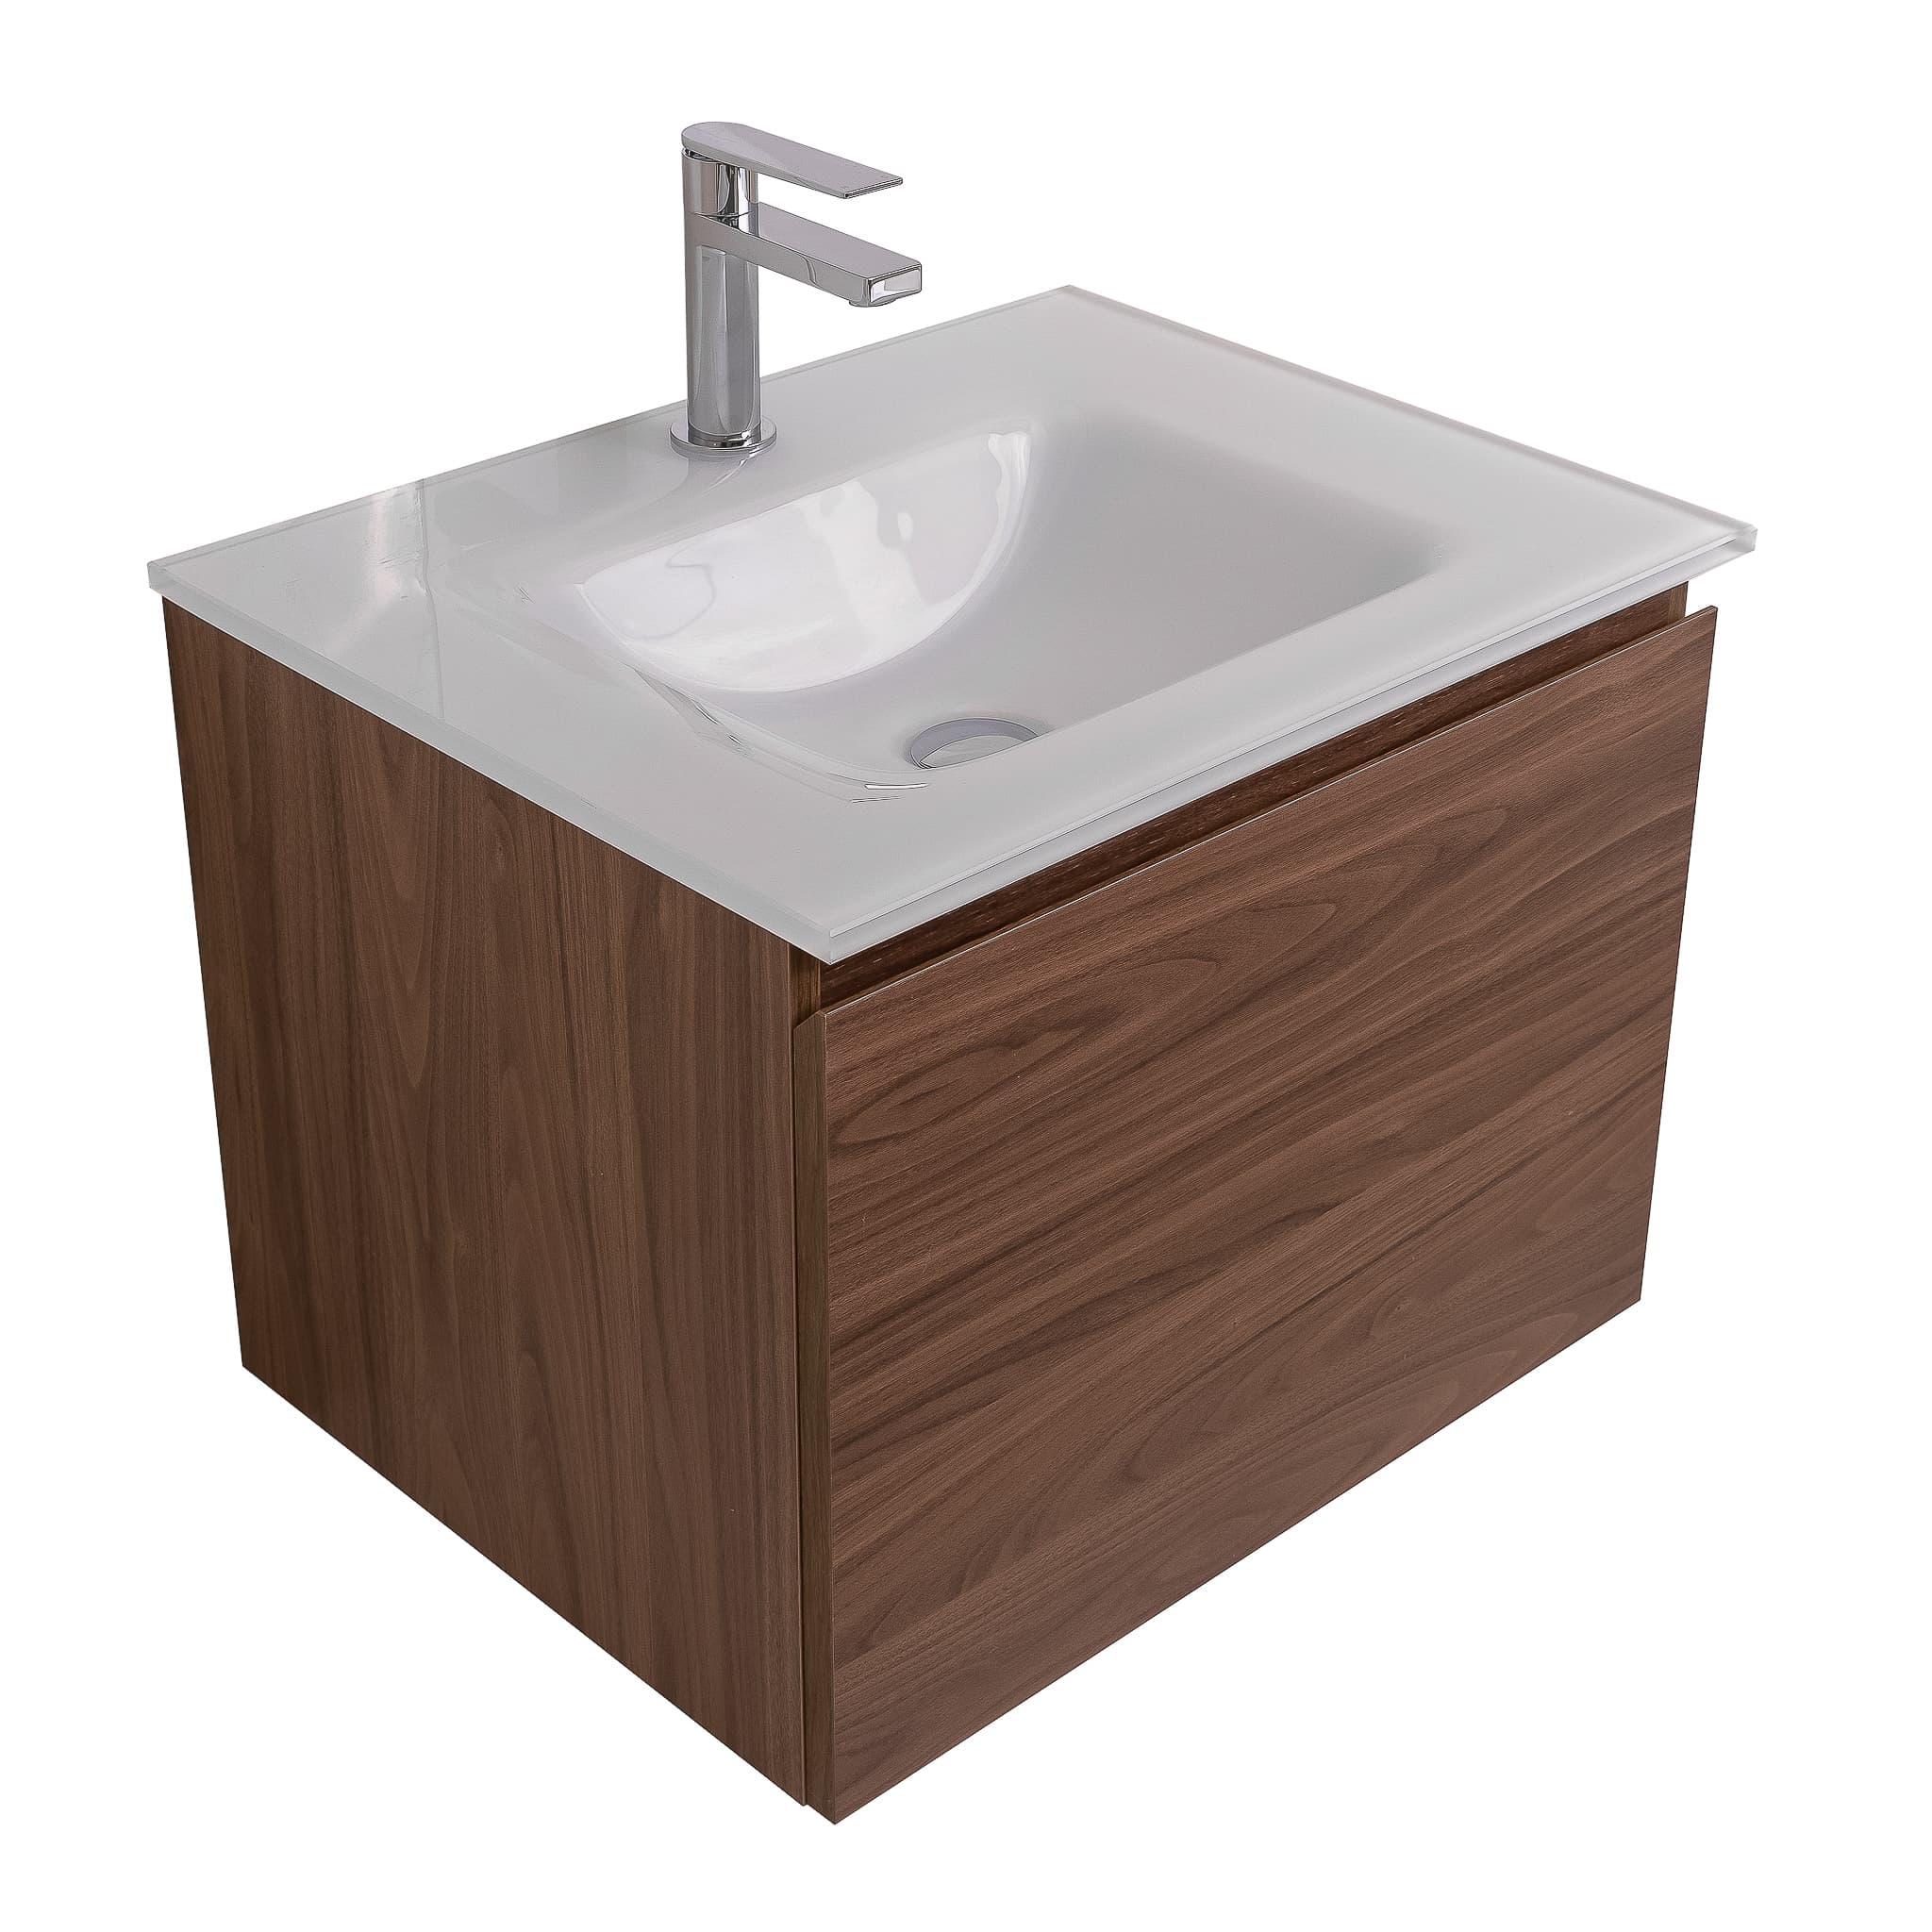 Venice 23.5 Walnut Wood Texture Cabinet, White Tempered Glass Sink, Wall Mounted Modern Vanity Set